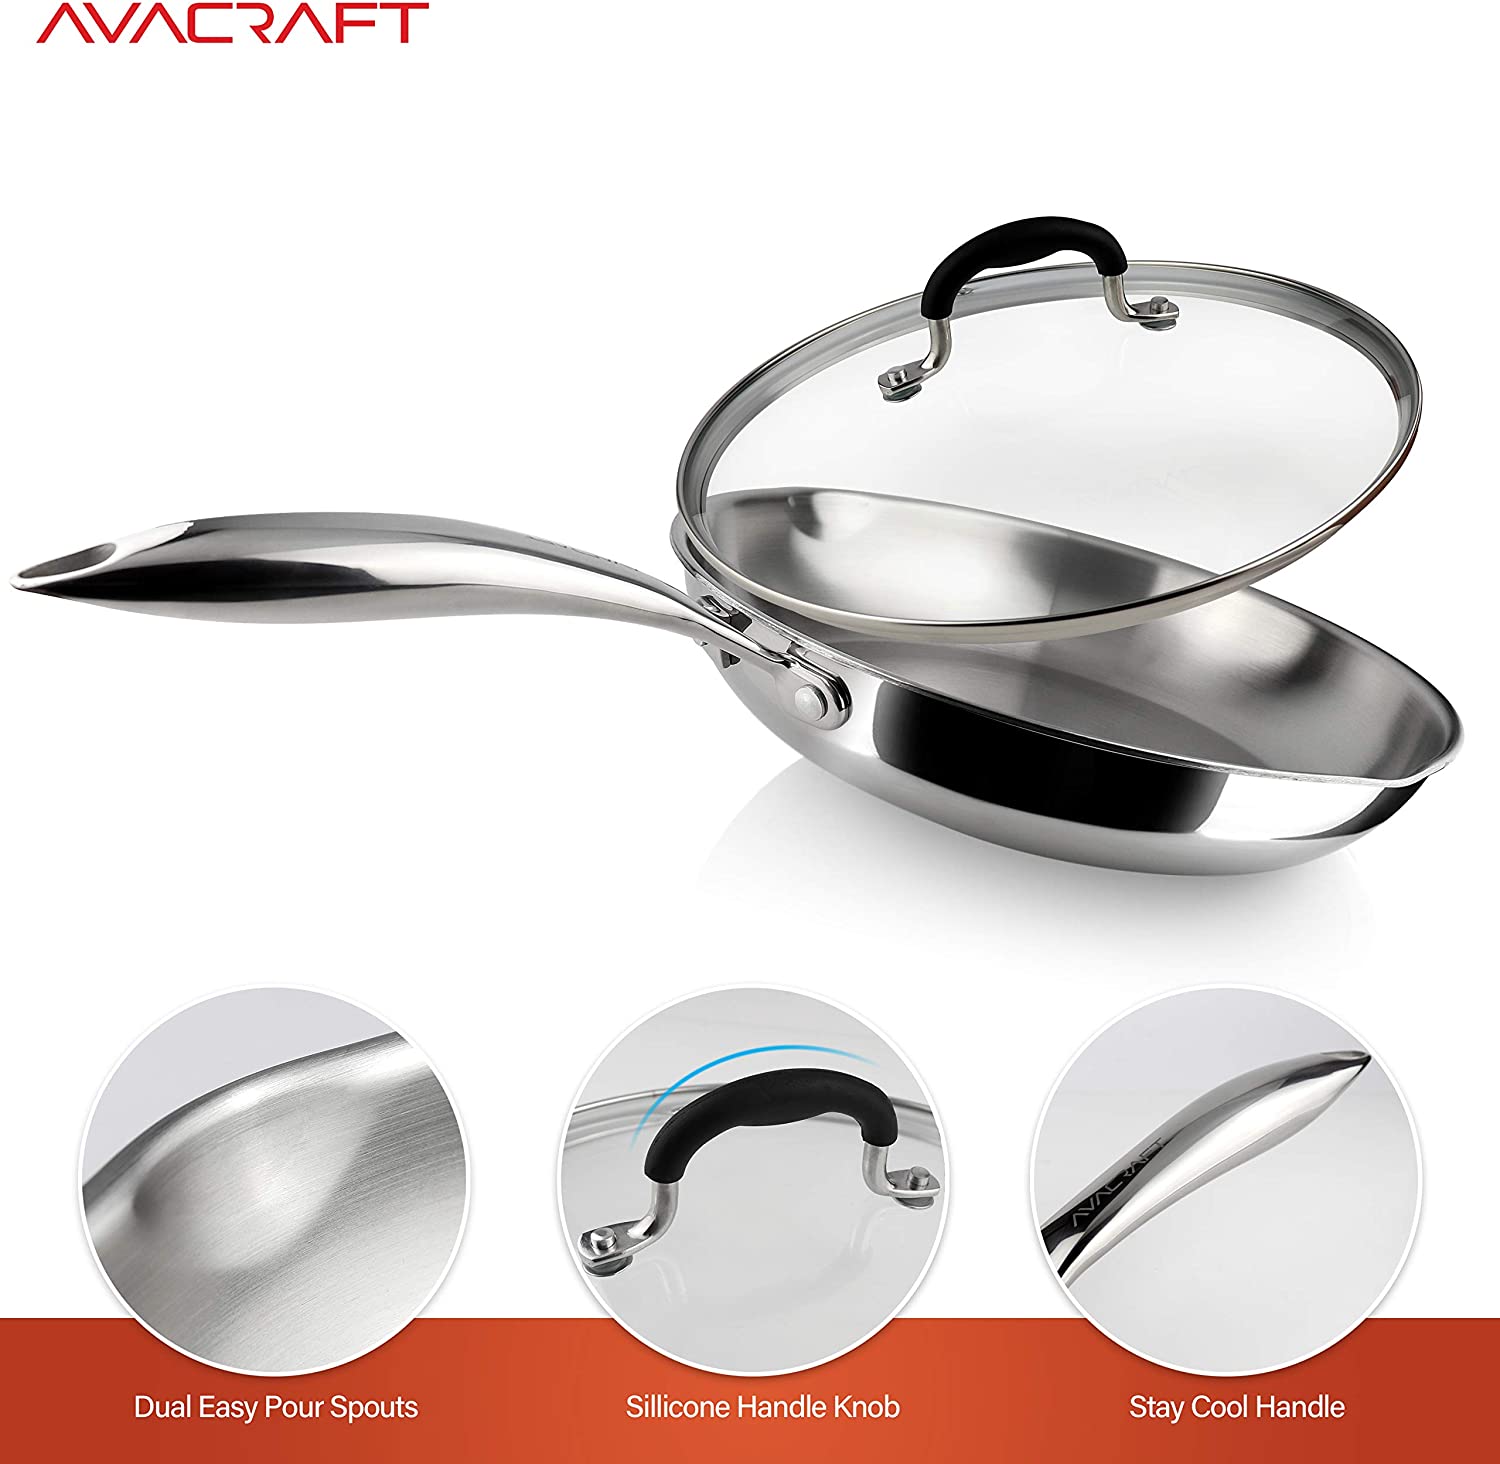 AVACRAFT Multipurpose Sauce Pan / Pot, Stainless Steel with Glass Strainer  Lid, Two Side Spouts for Easy Pour with Ergonomic Handle (Tri-Ply Capsule